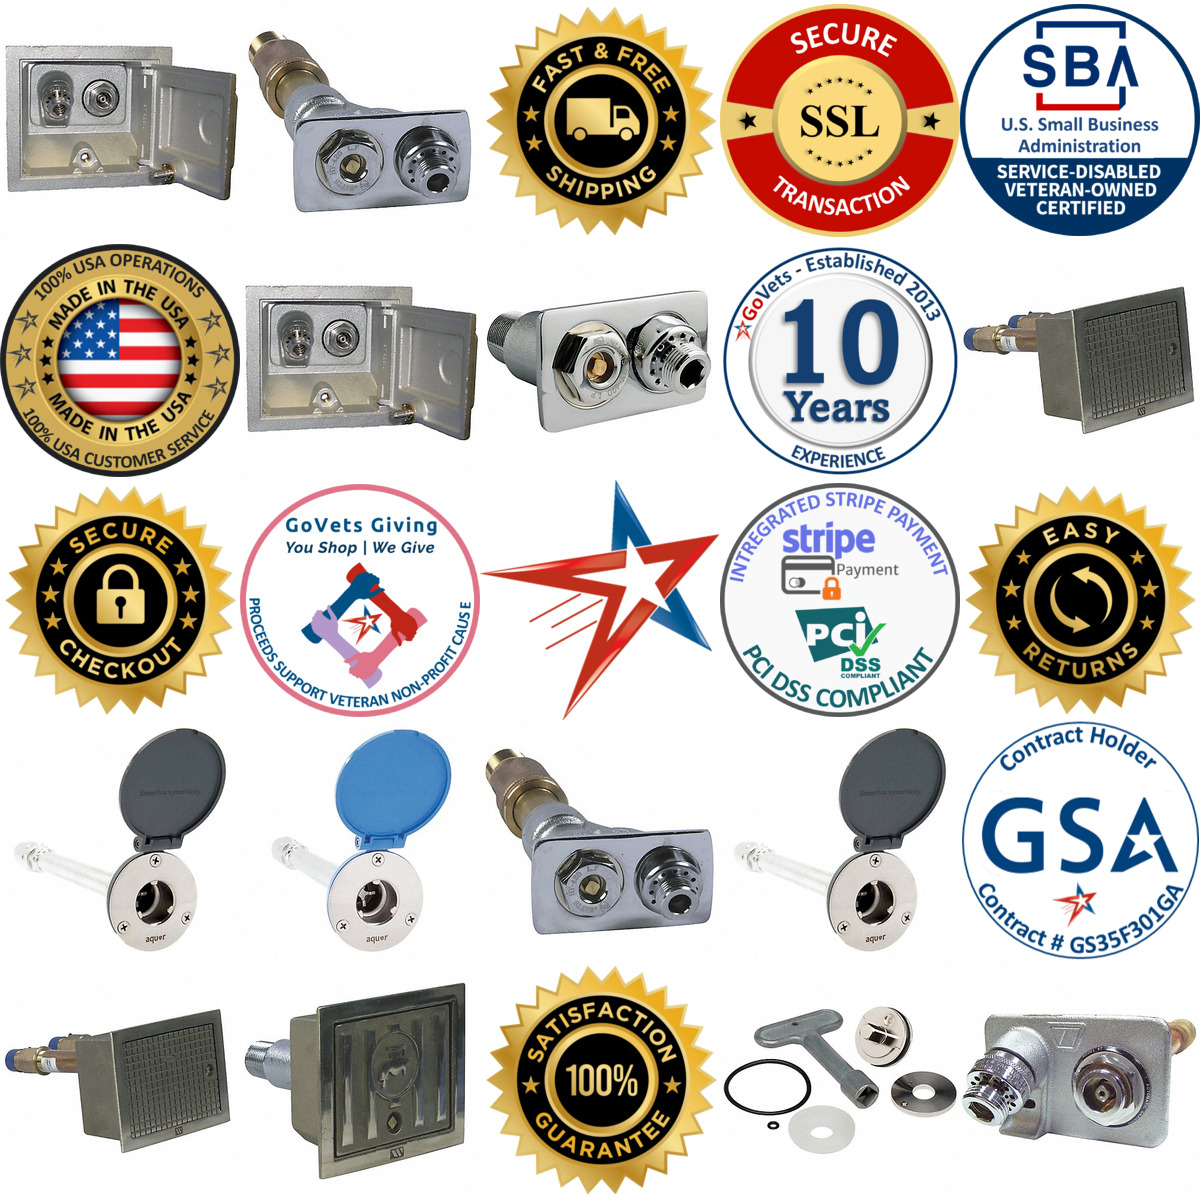 A selection of Wall Hydrants products on GoVets